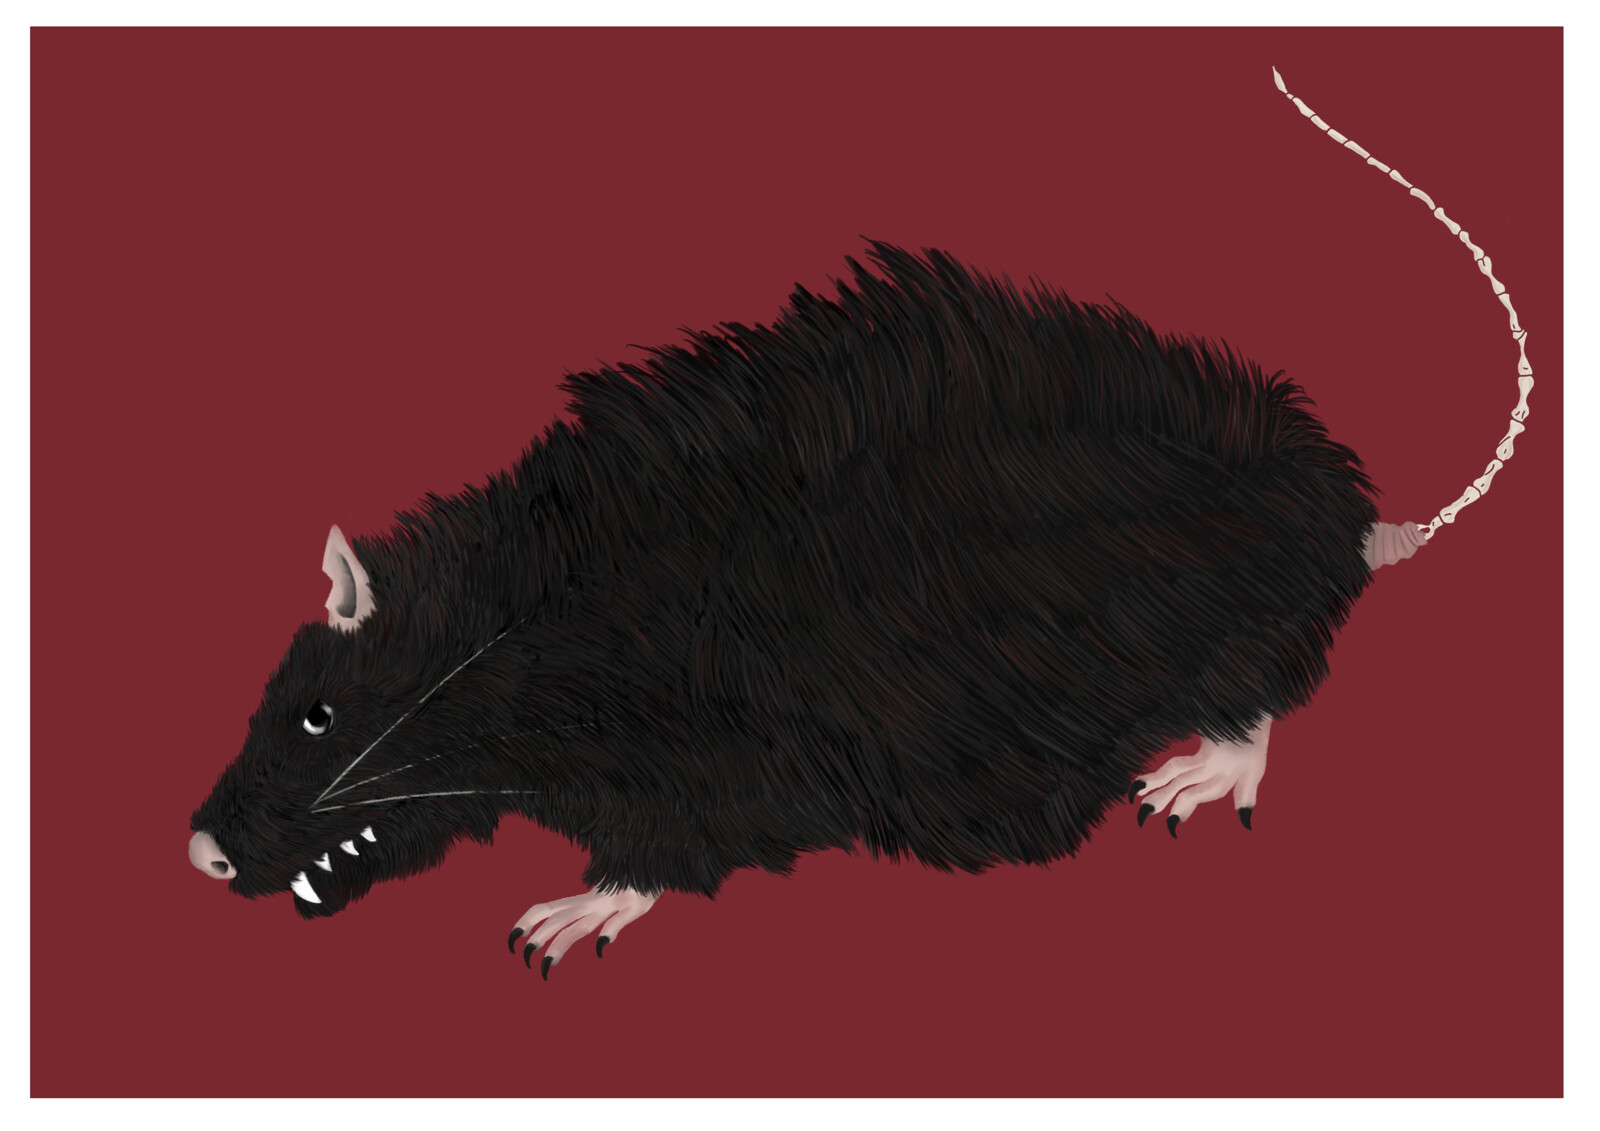 Final rat design, as decided by team